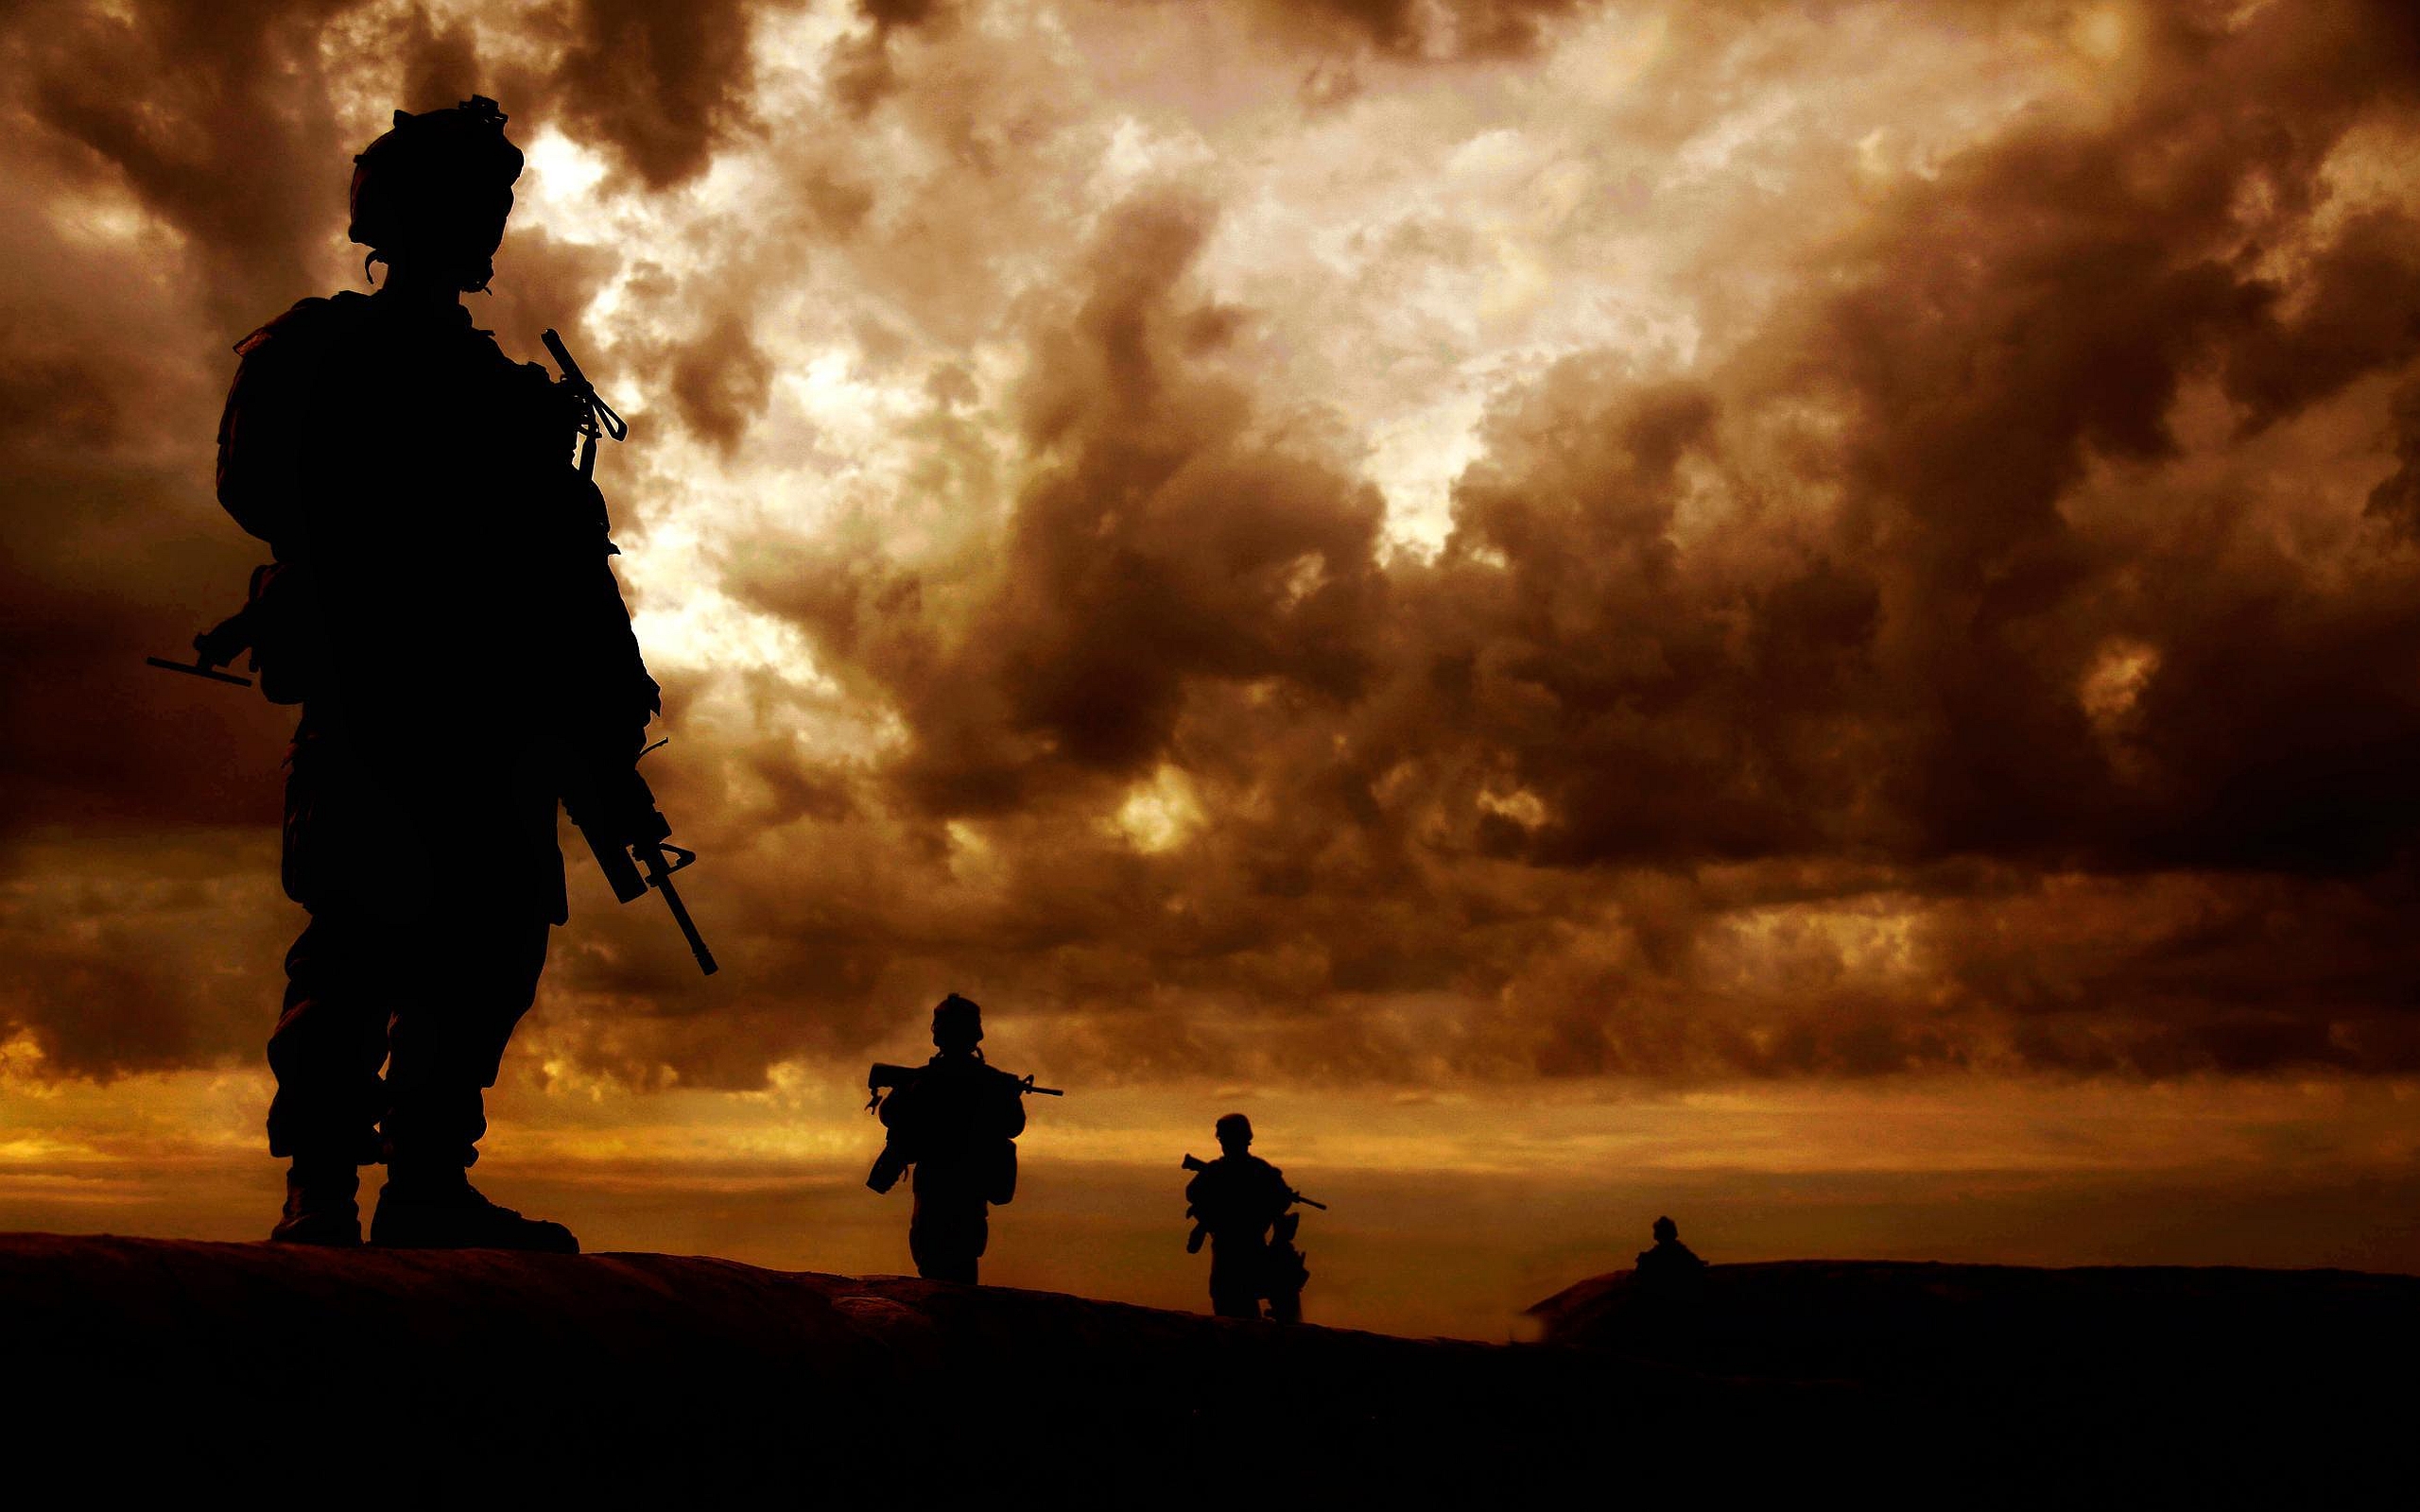 Soldier HD Wallpaper | Background Image | 2560x1600 | ID:326898